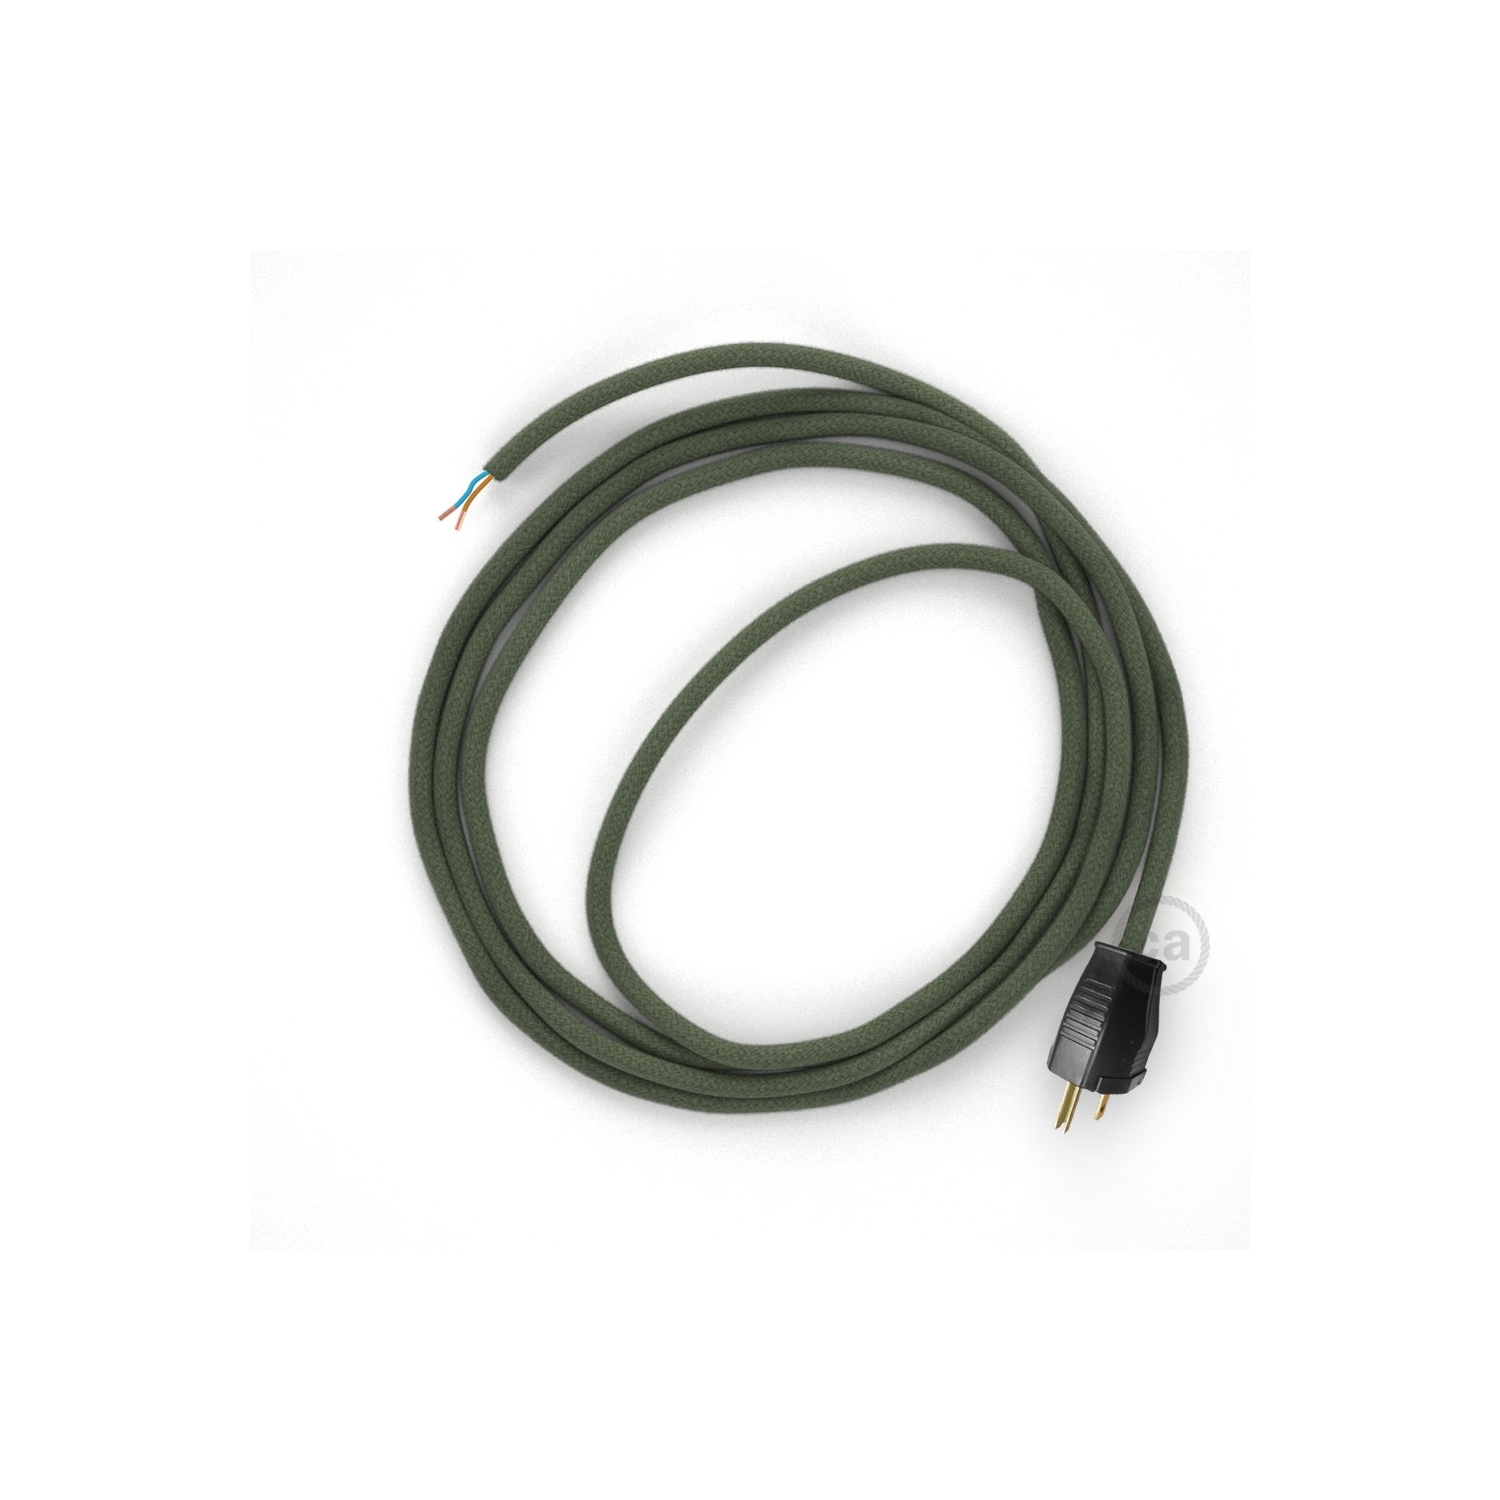 Cord-set - RC63 Gray Green Cotton Covered Round Cable